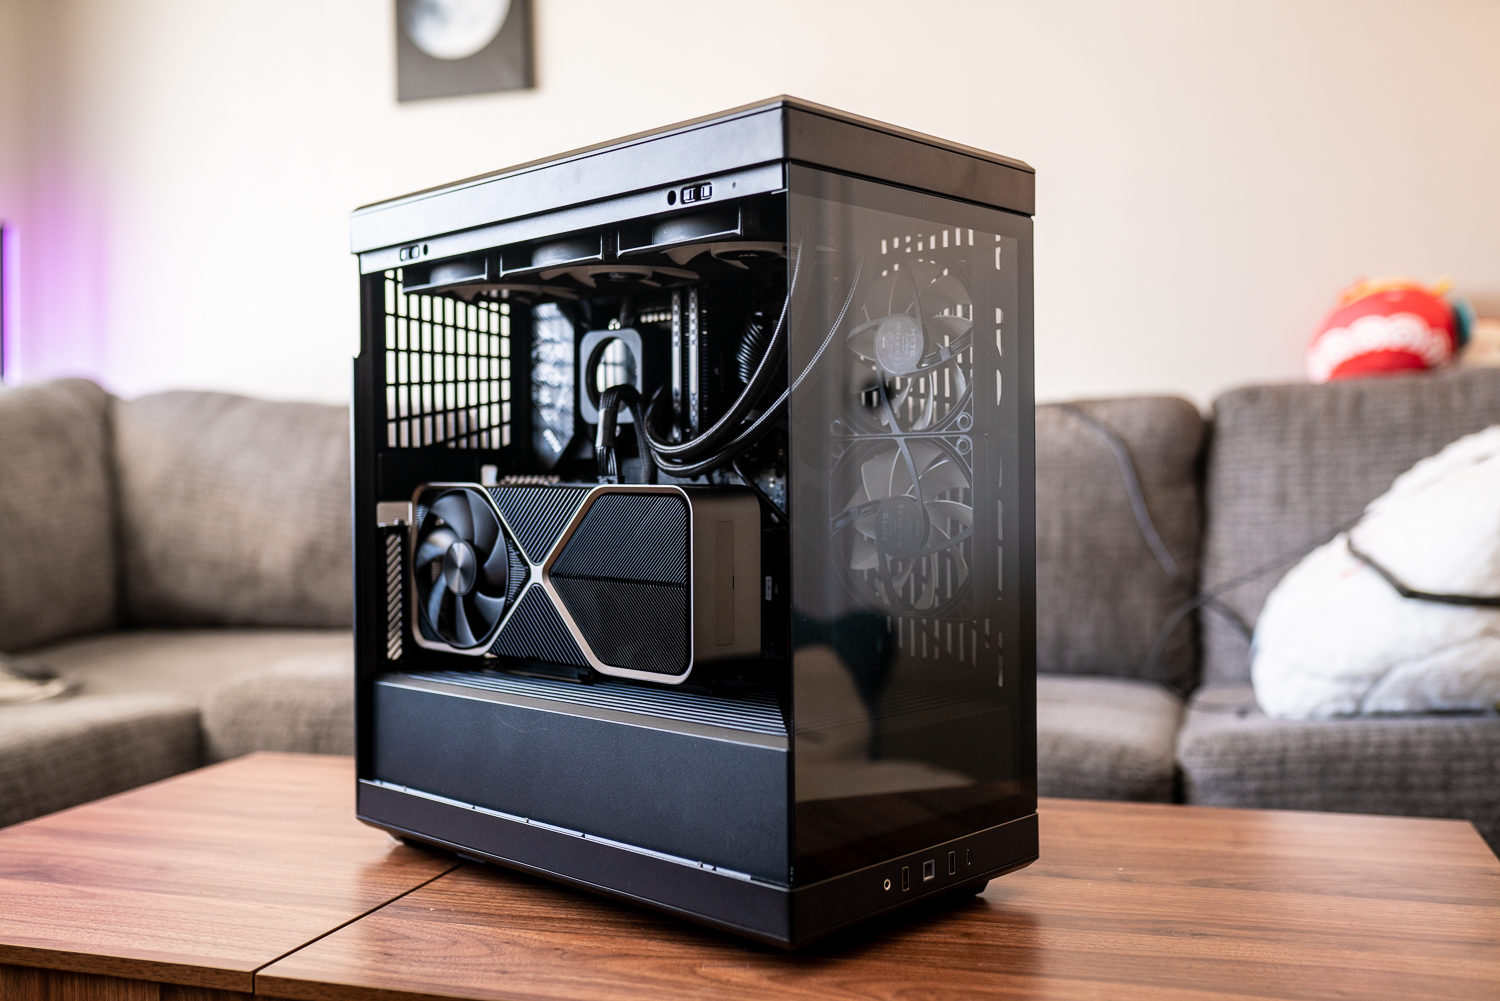 HYTE Y40 test - glass case with special GPU mounting